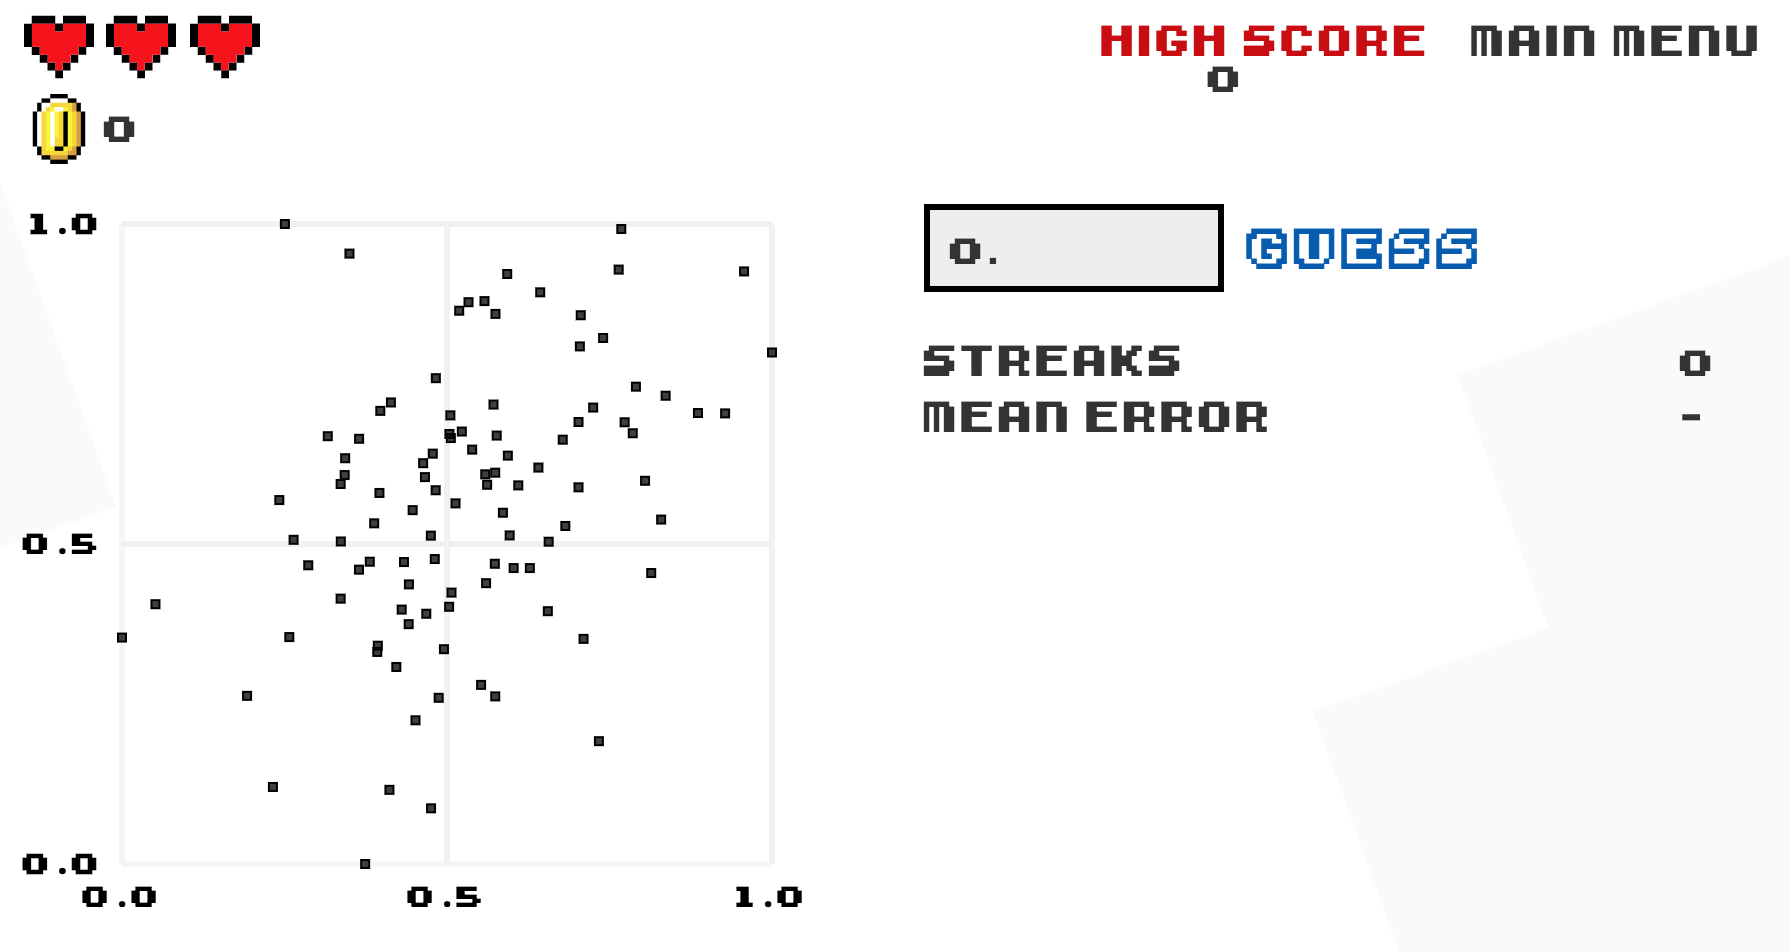 Preview of “Guess the Correlation” game.